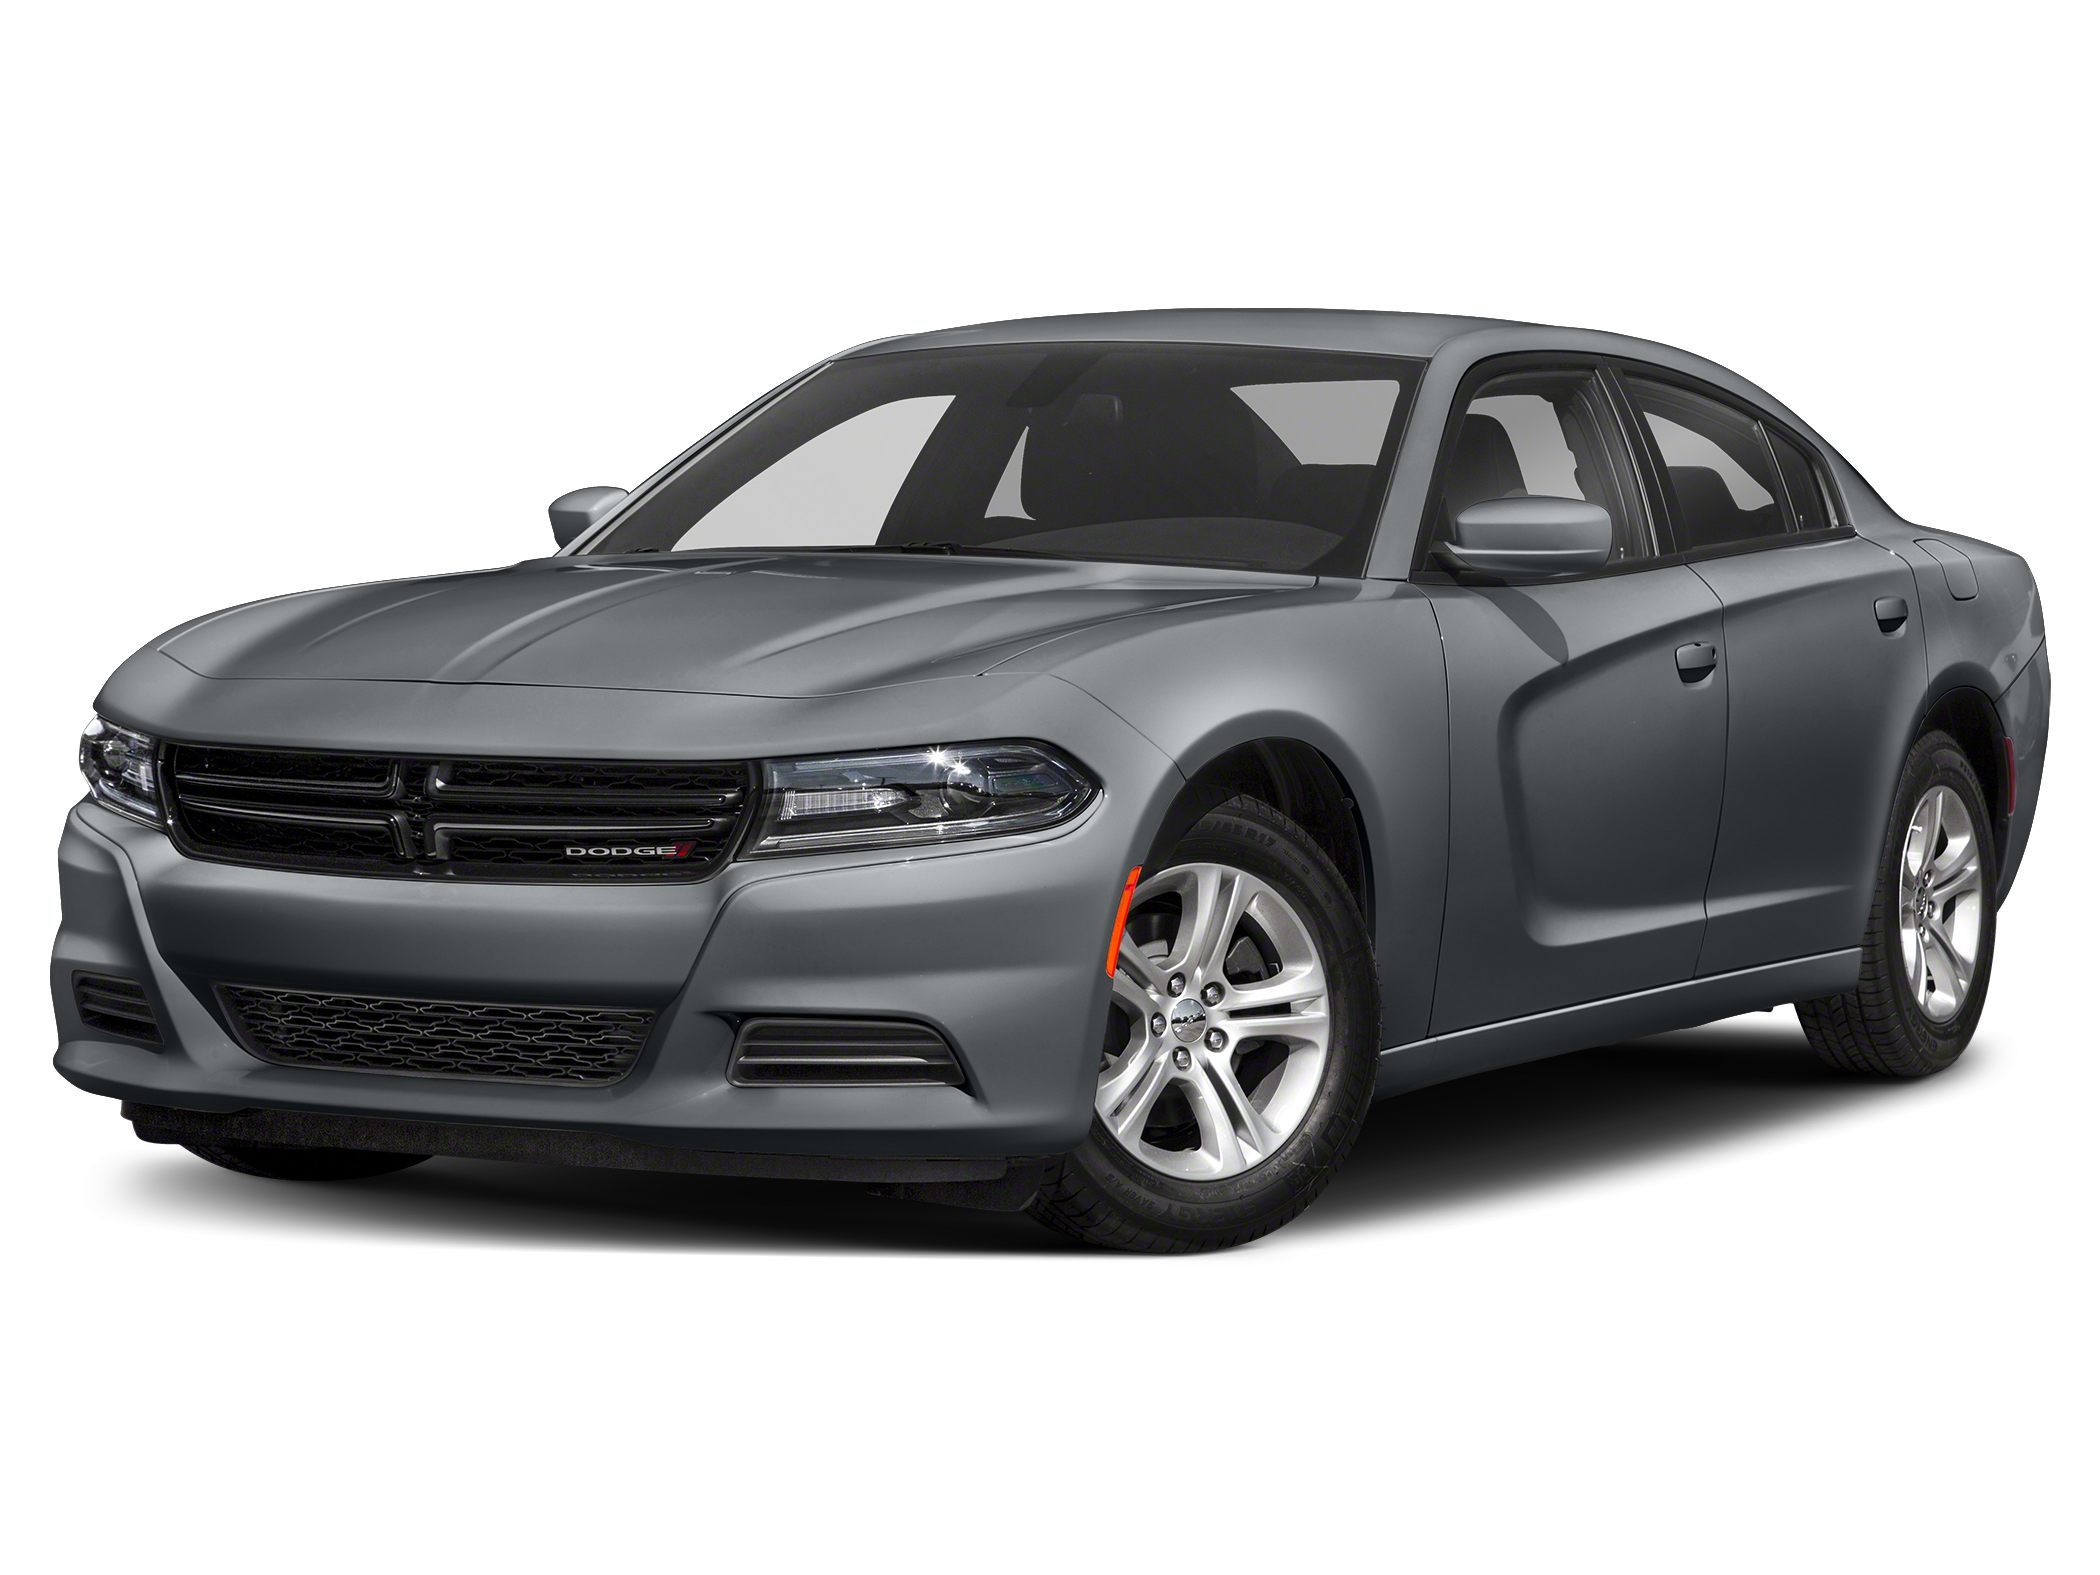 Used Dodge Charger Levittown Ny